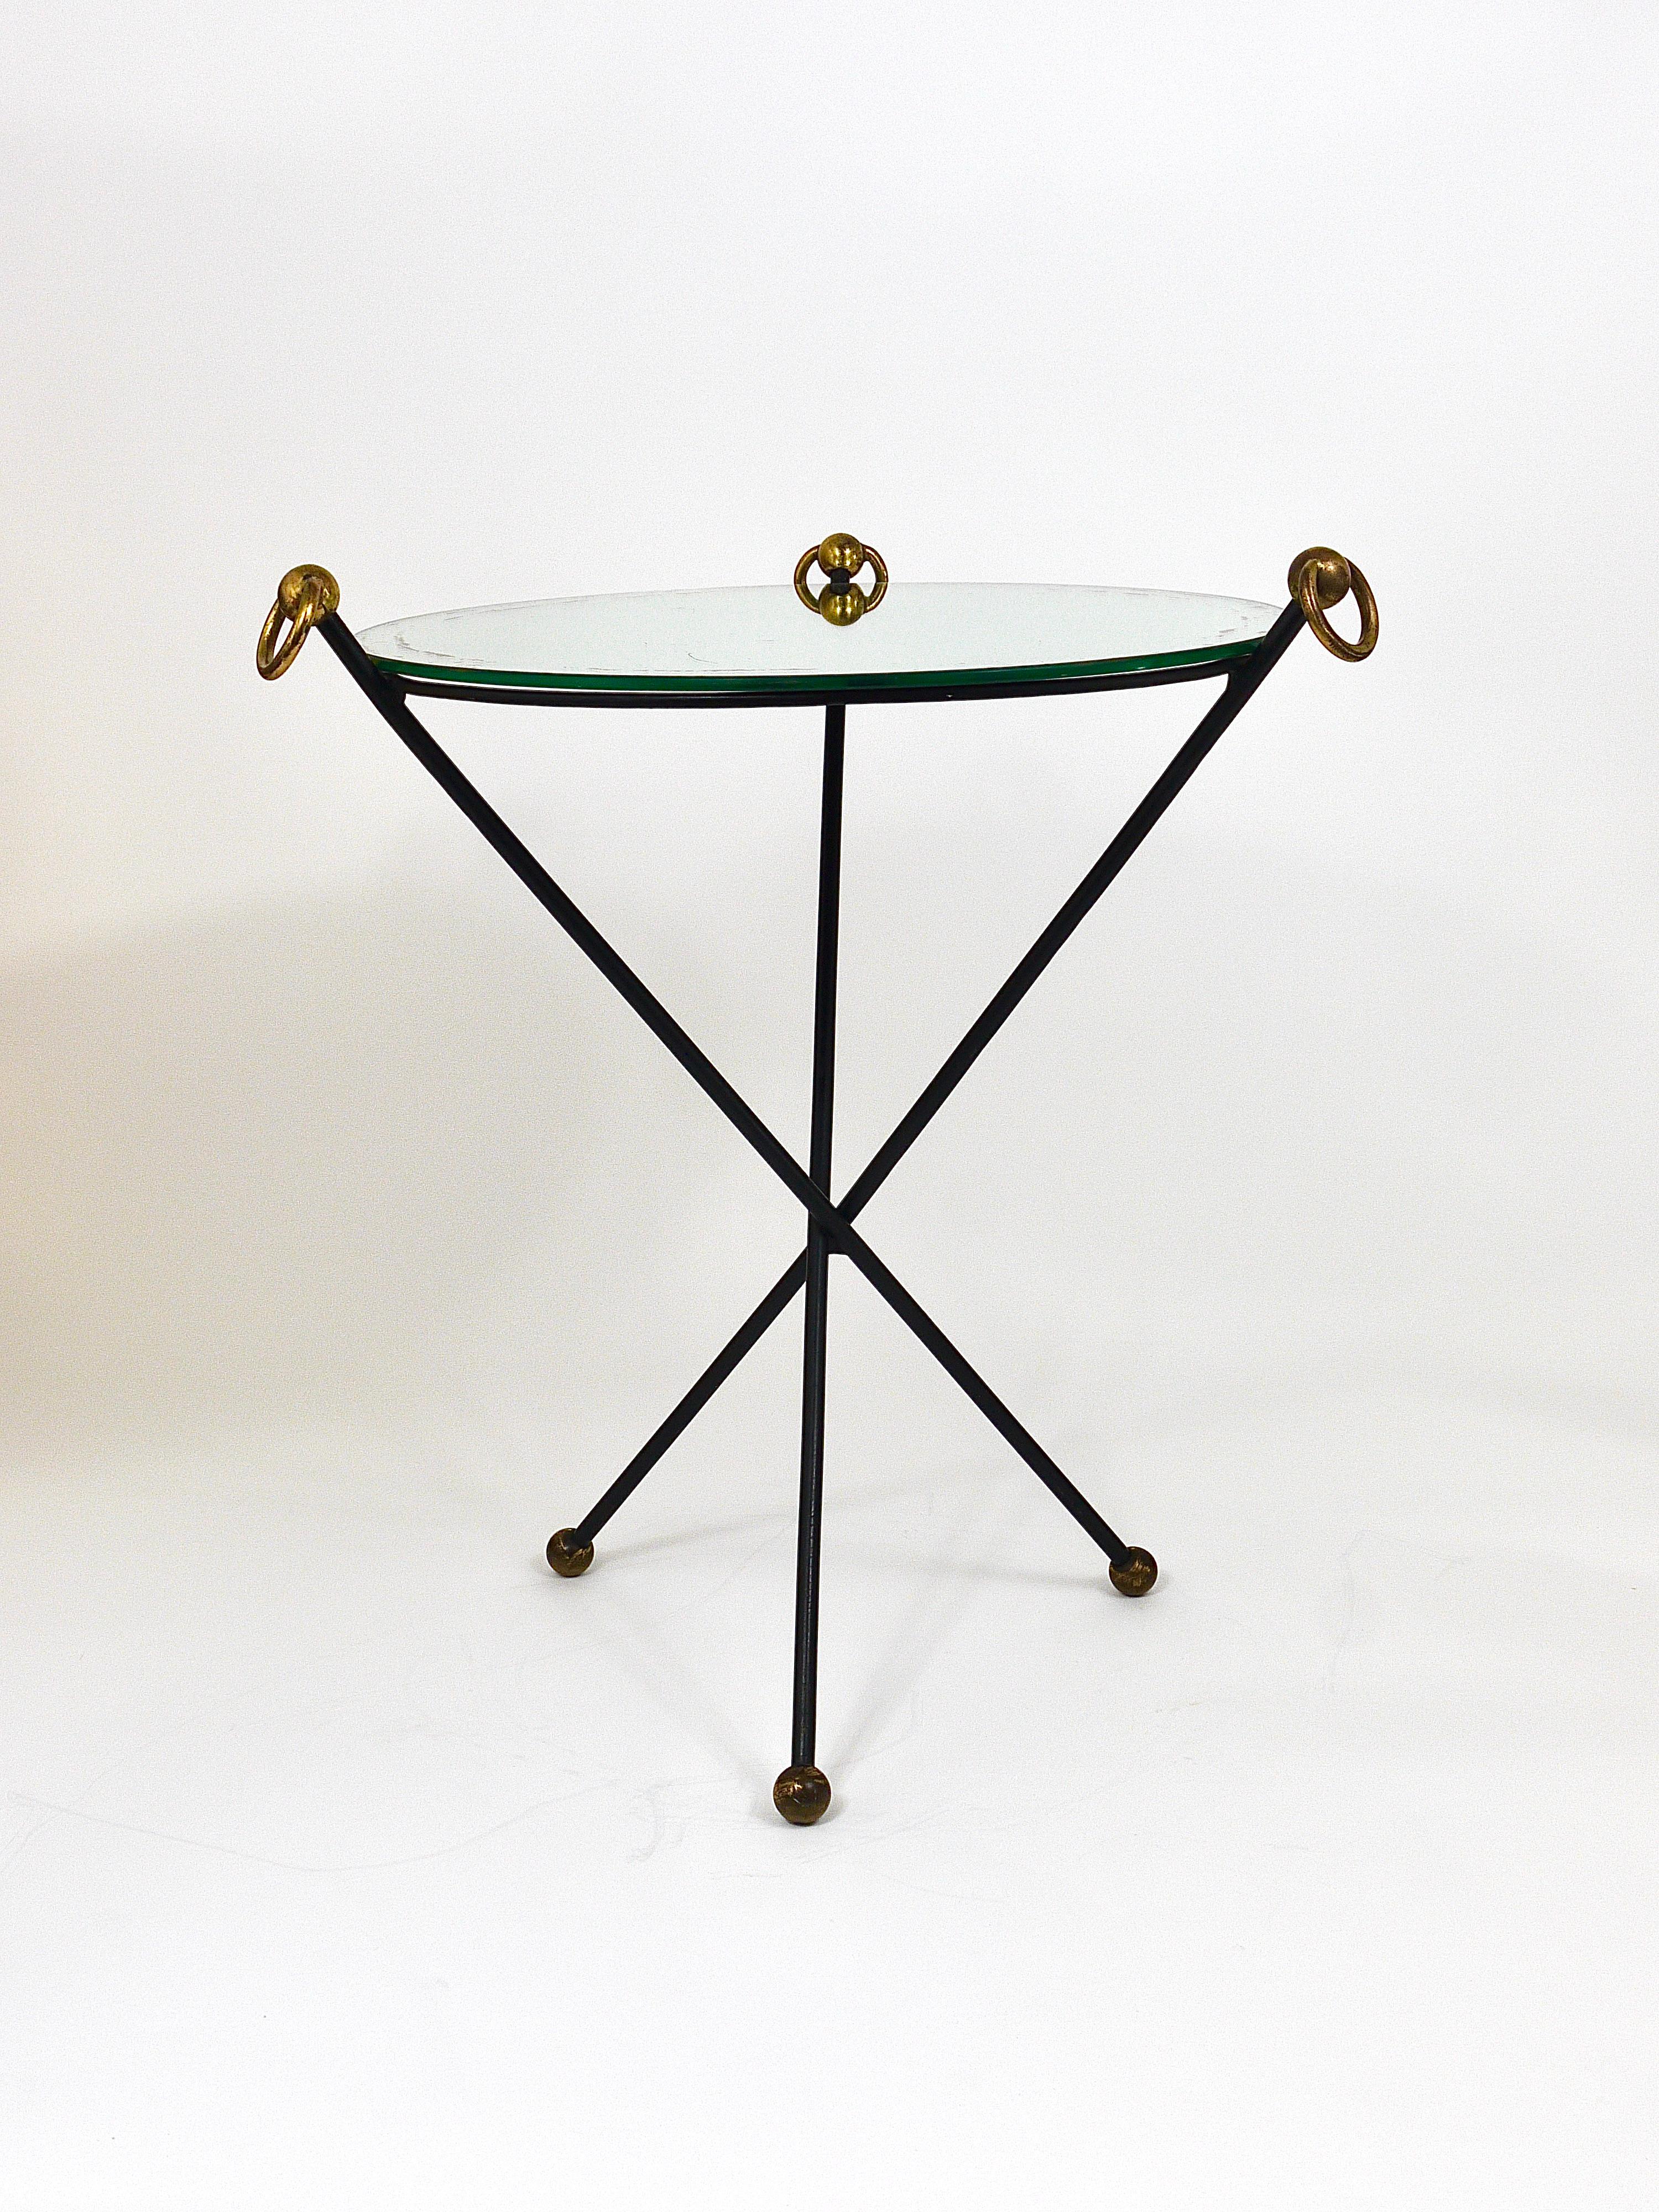 French Mid-Century Modern Mirror Side Table, Jacques Adnet Style, Brass, 1950s For Sale 9